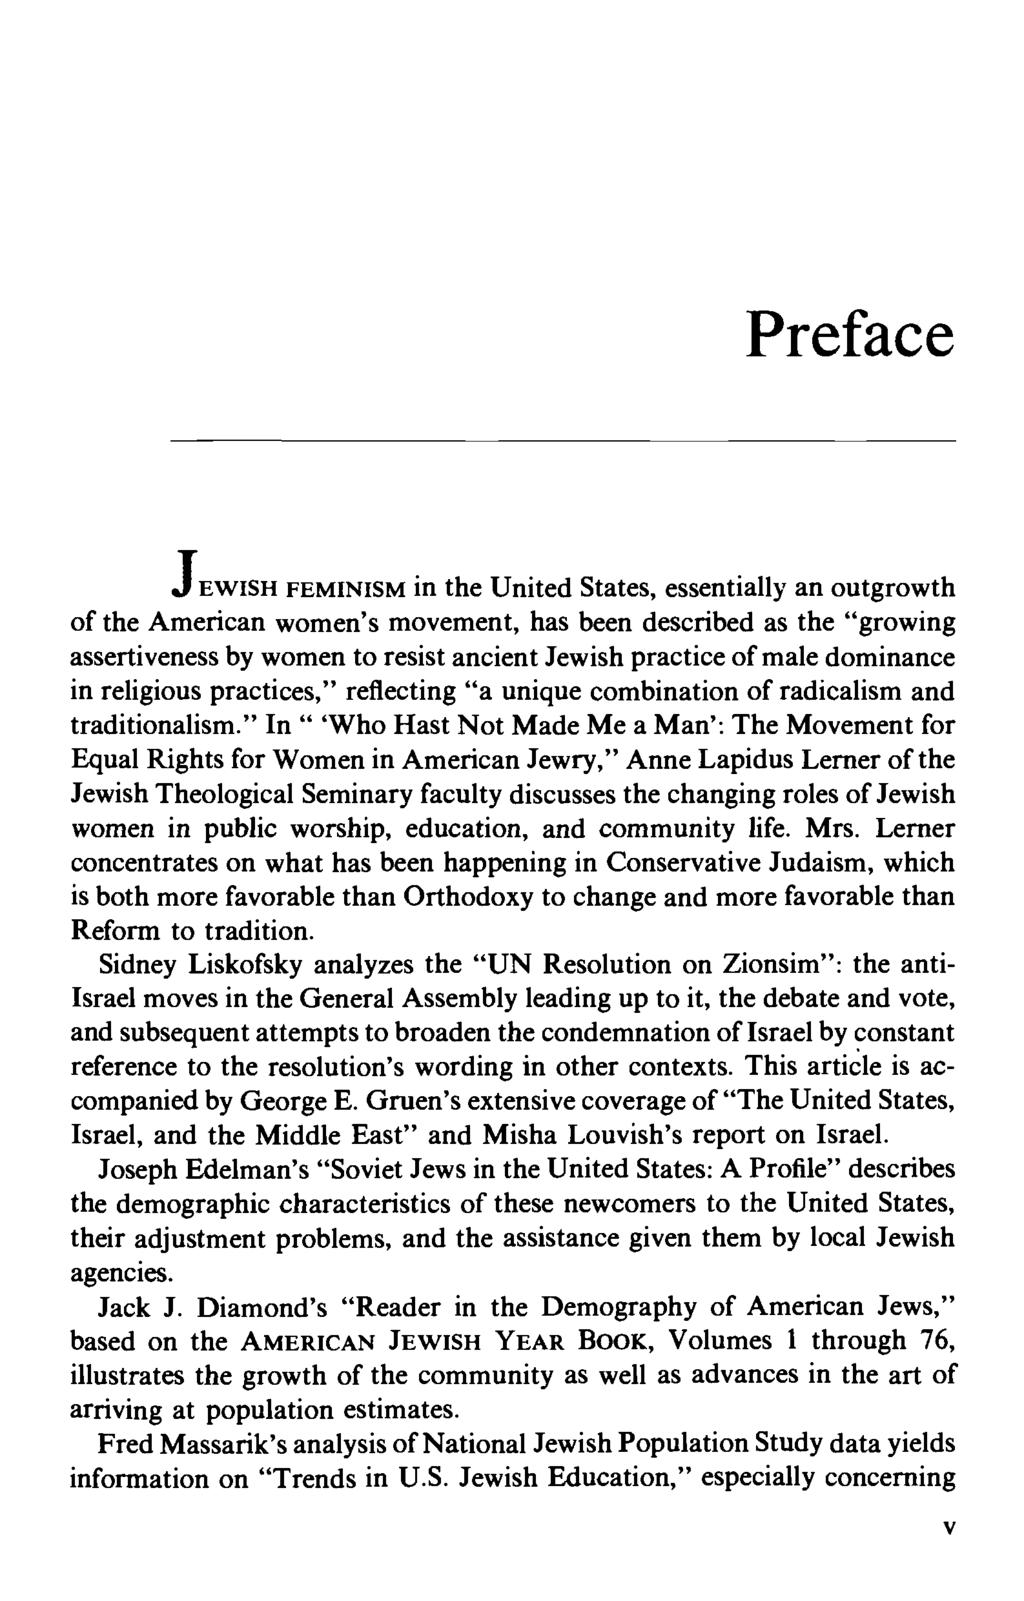 Preface J EWISH FEMINISM in the United States, essentially an outgrowth of the American women's movement, has been described as the "growing assertiveness by women to resist ancient Jewish practice